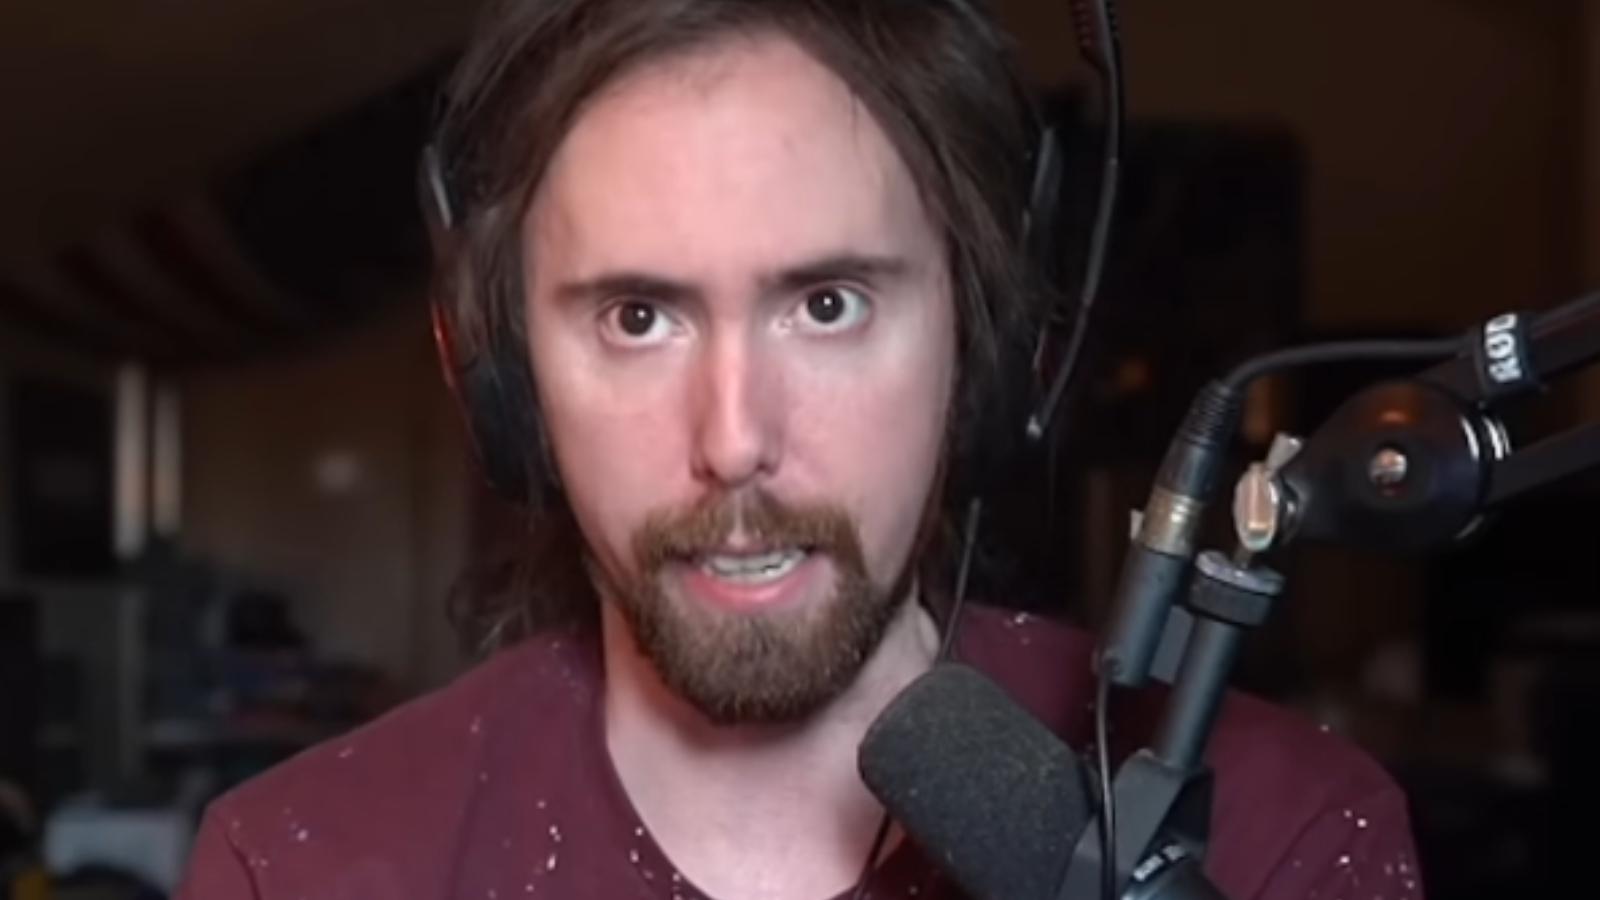 asmongold streaming on twitch in his room